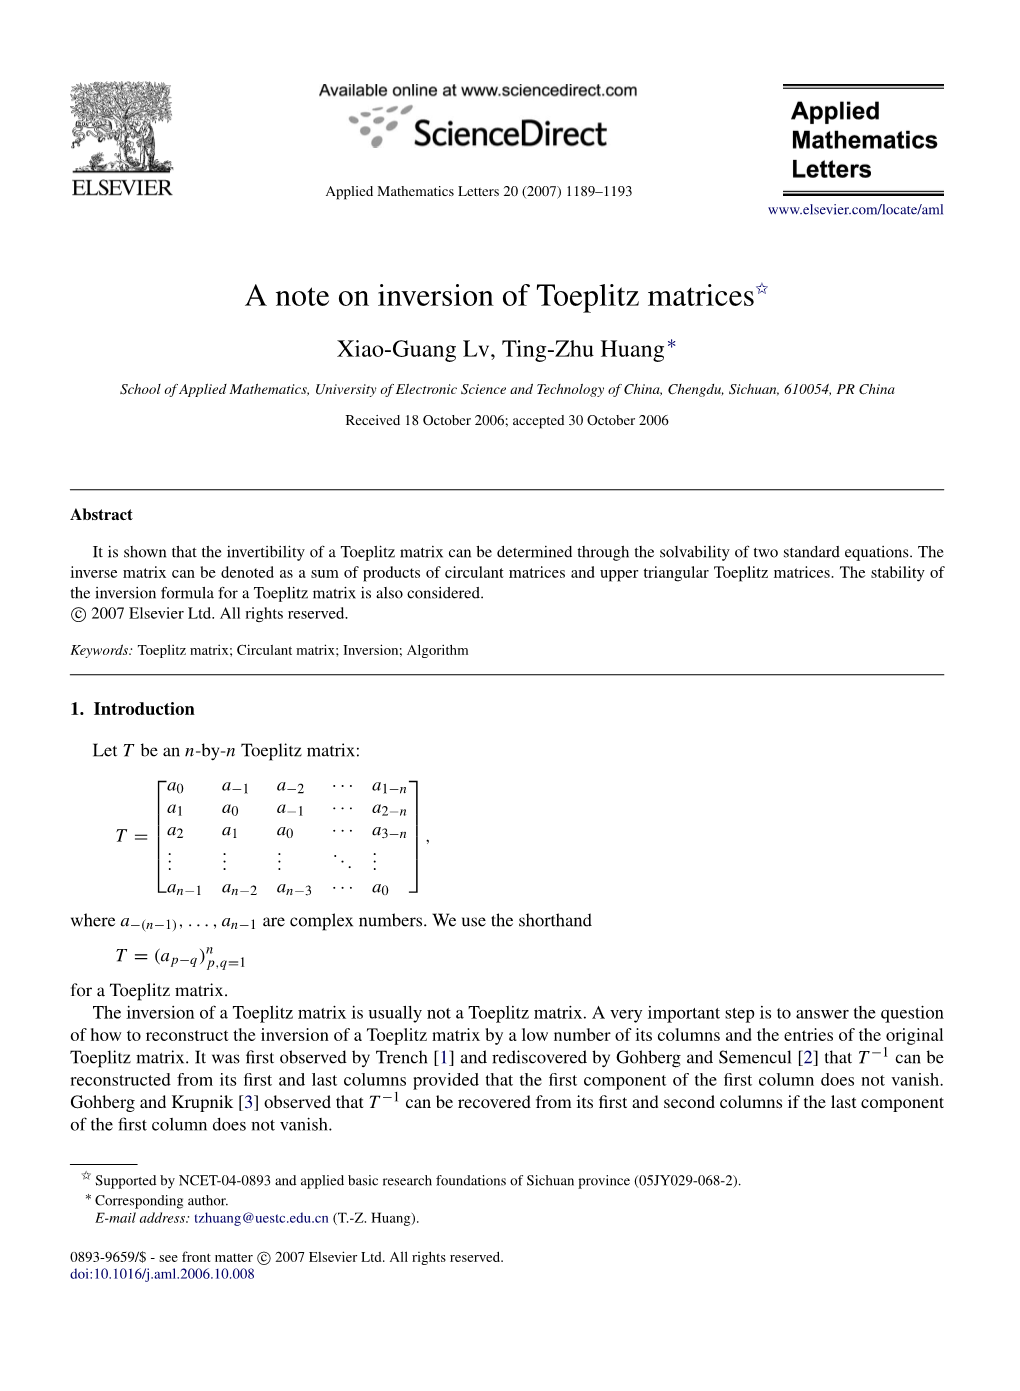 A Note on Inversion of Toeplitz Matrices$